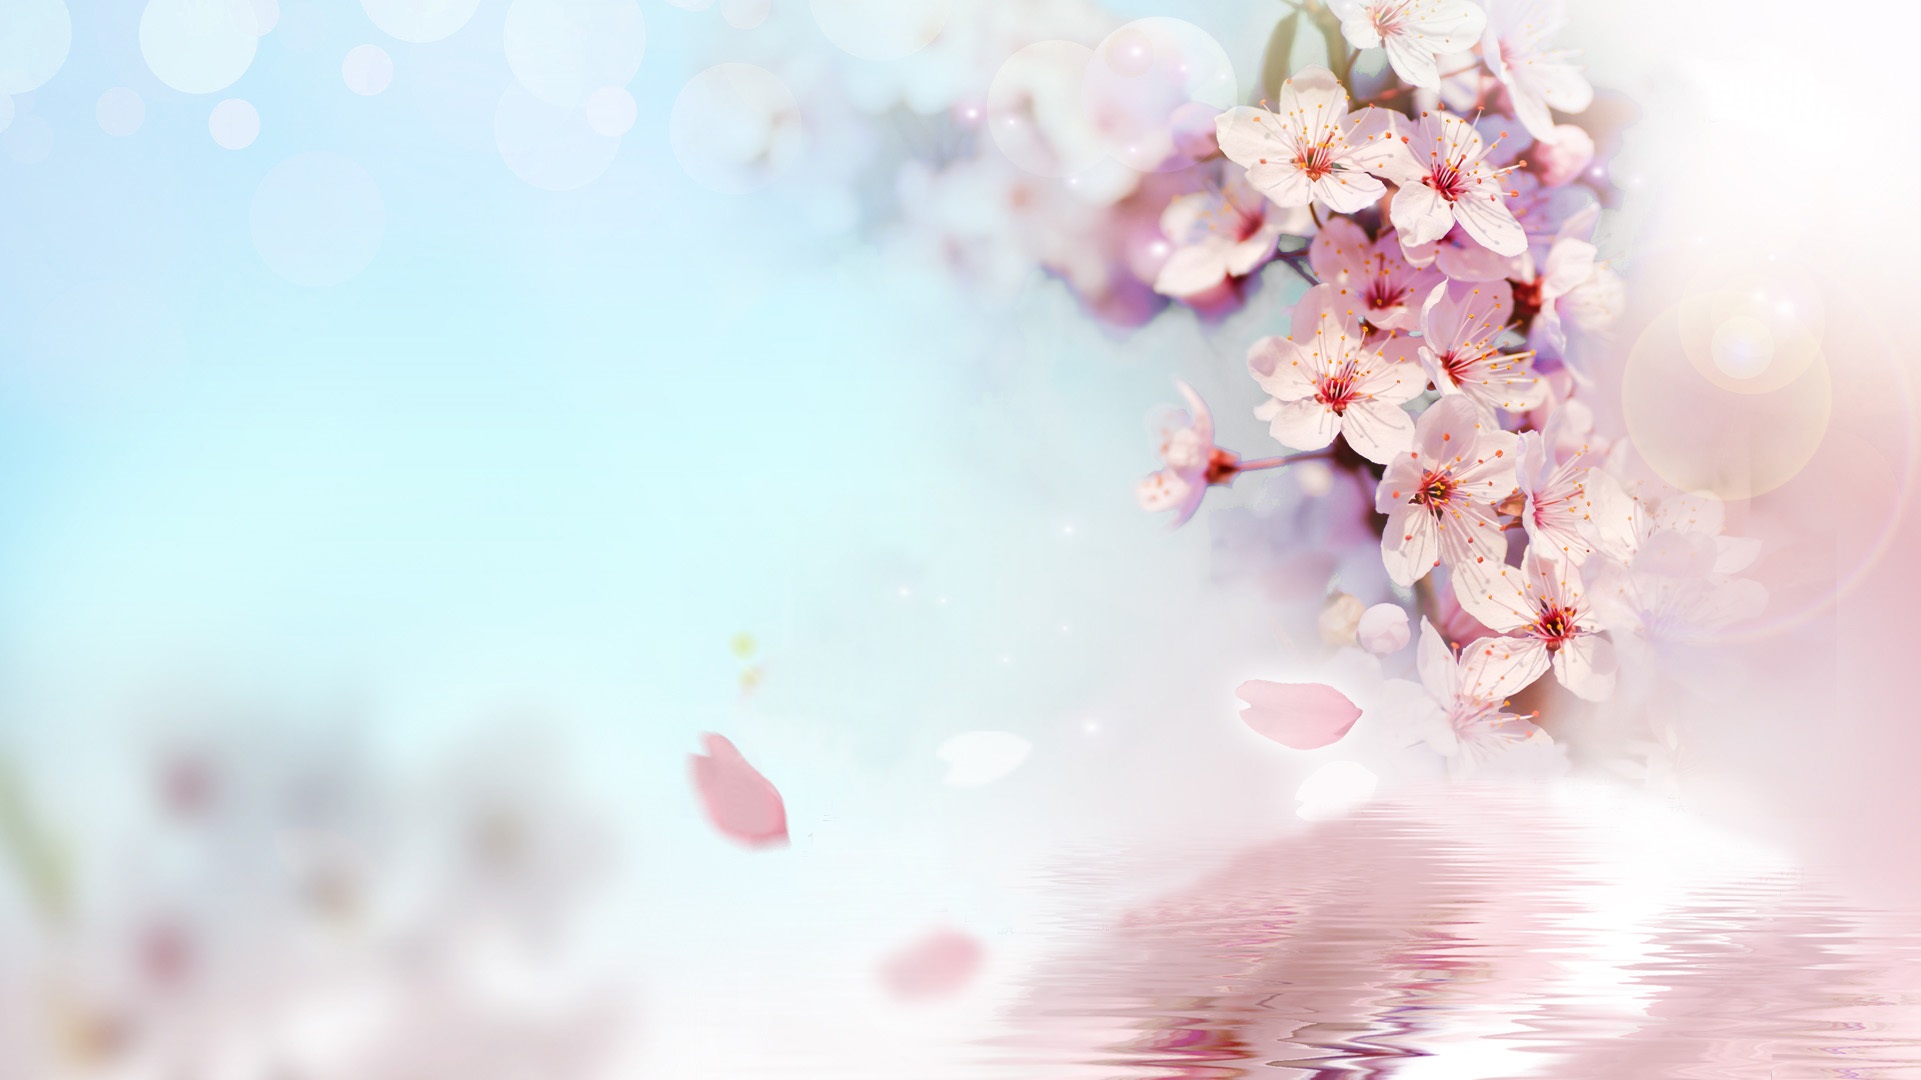 Peach Flowers Wallpapers HD Pictures One HD Wallpaper